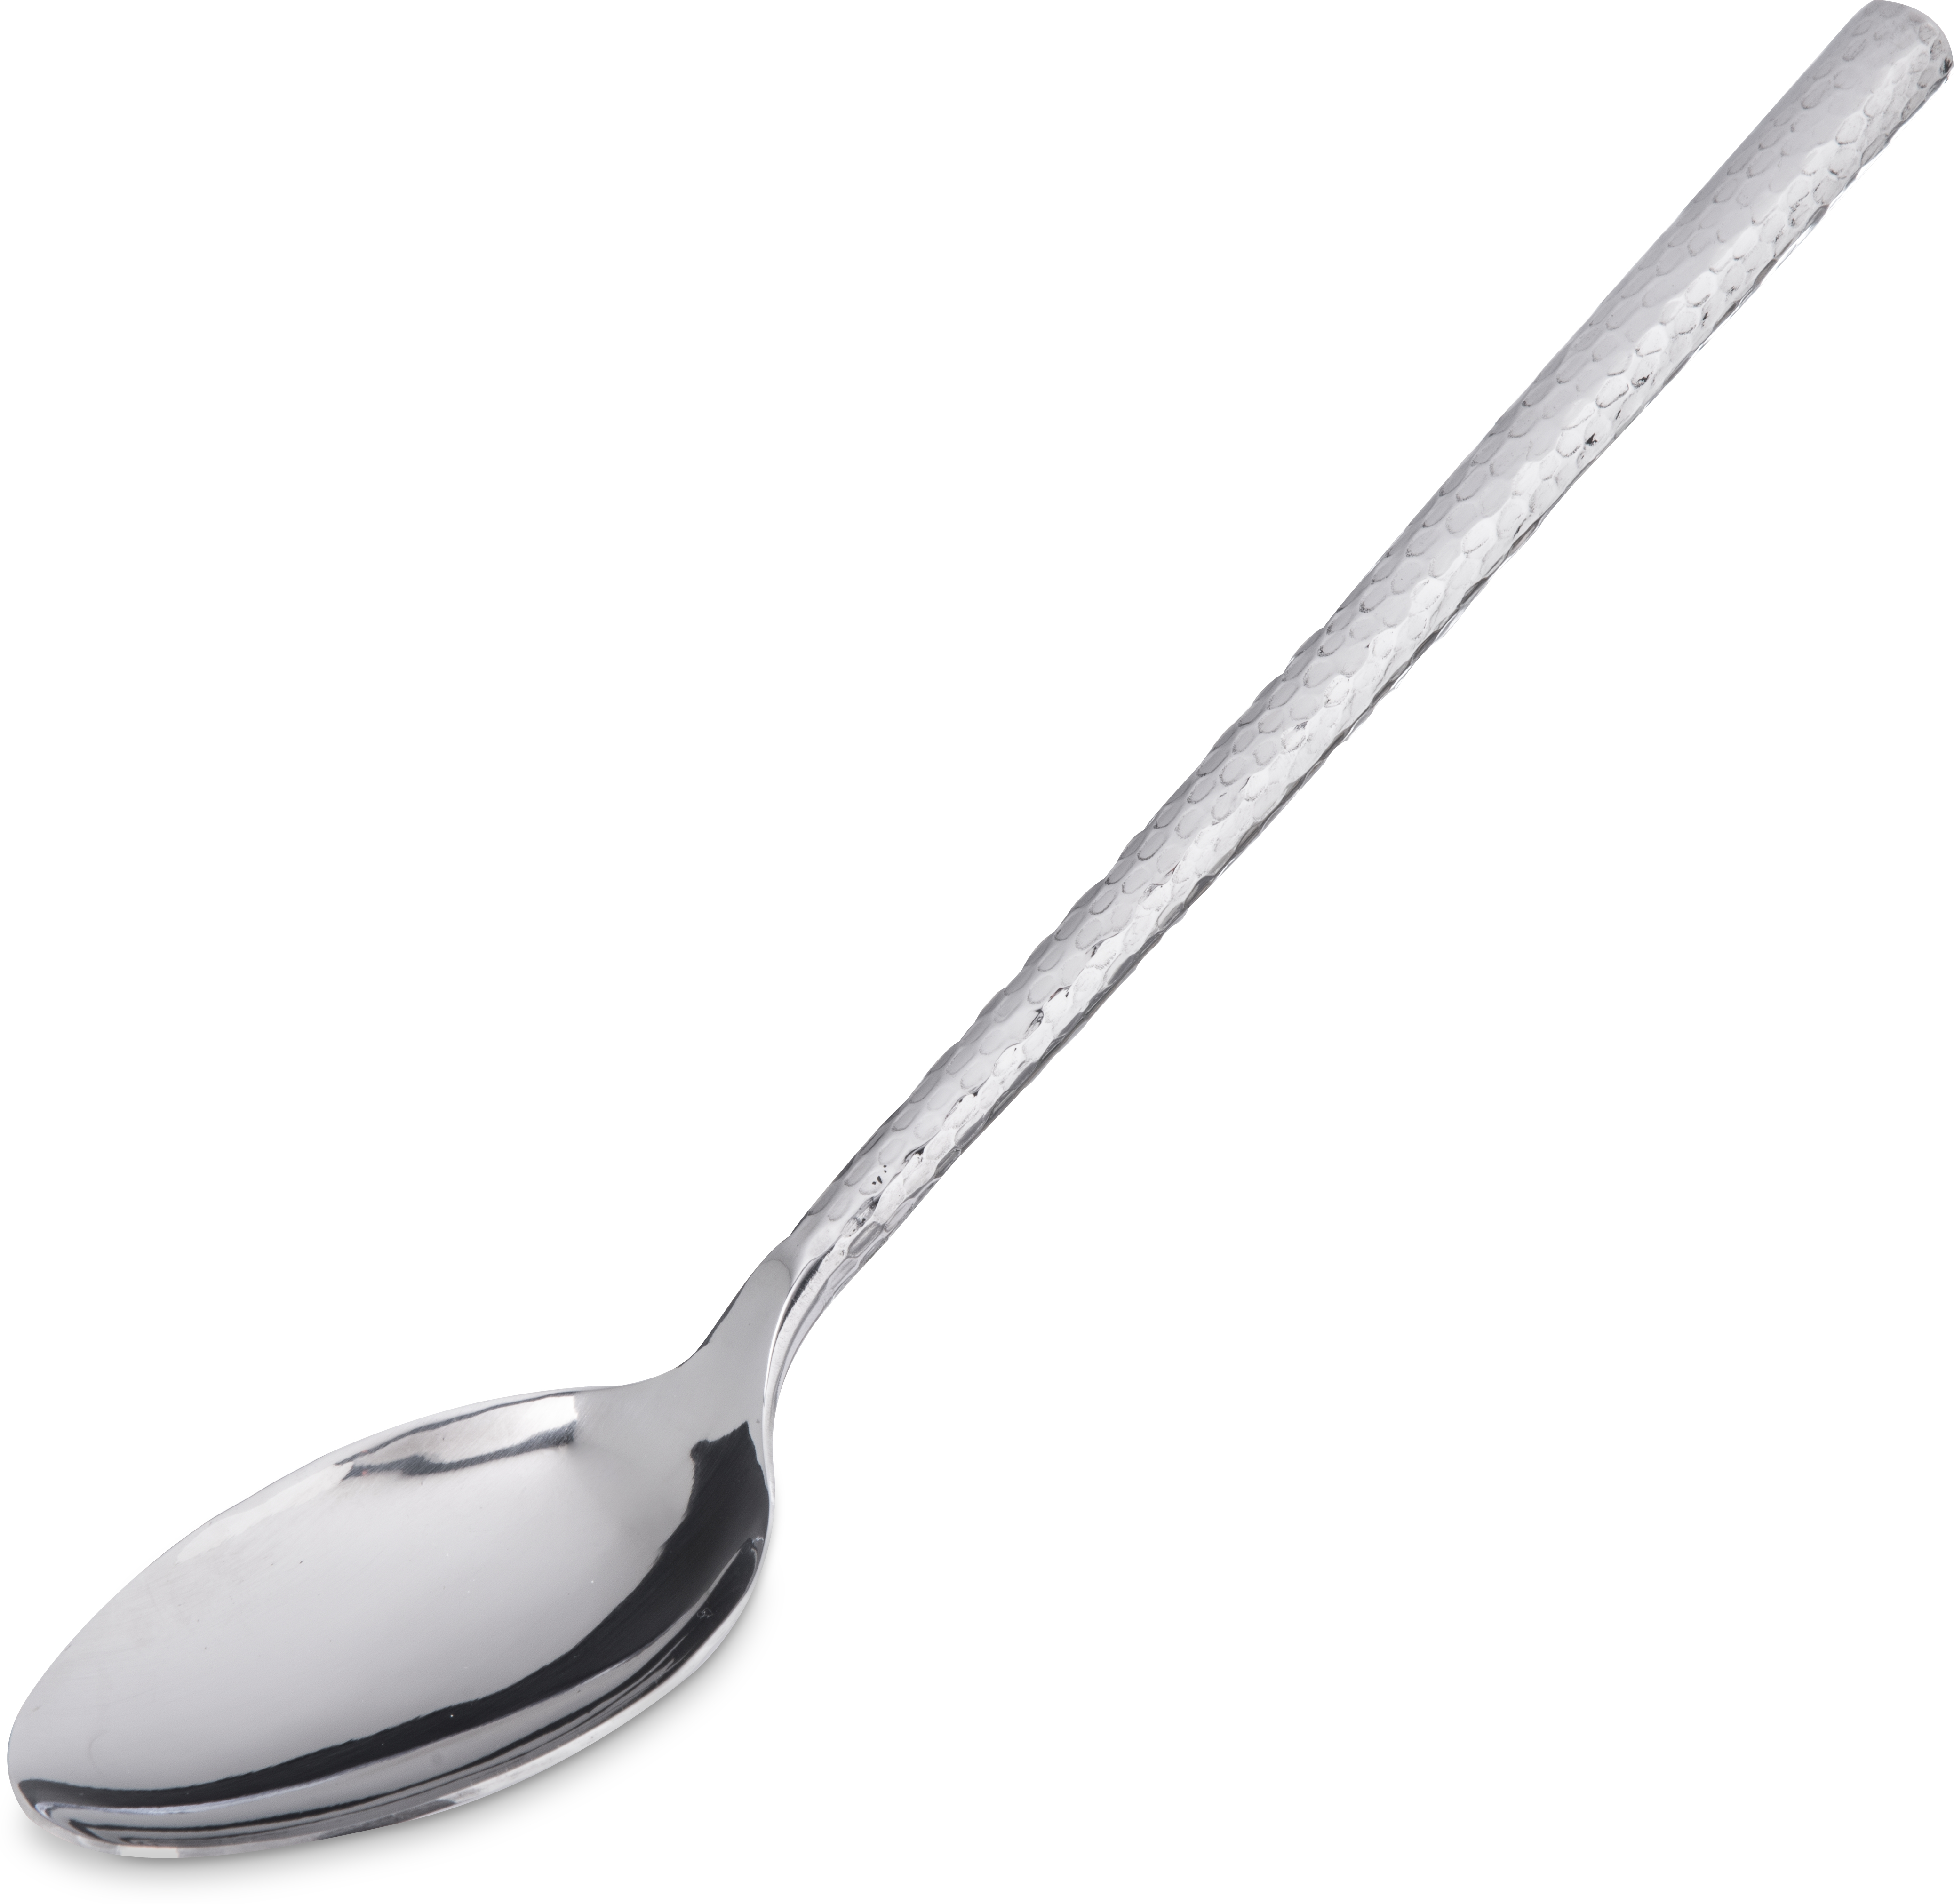 Terra Solid Serving Spoon 12 - Hammered Mirror Finish - Stainless Steel